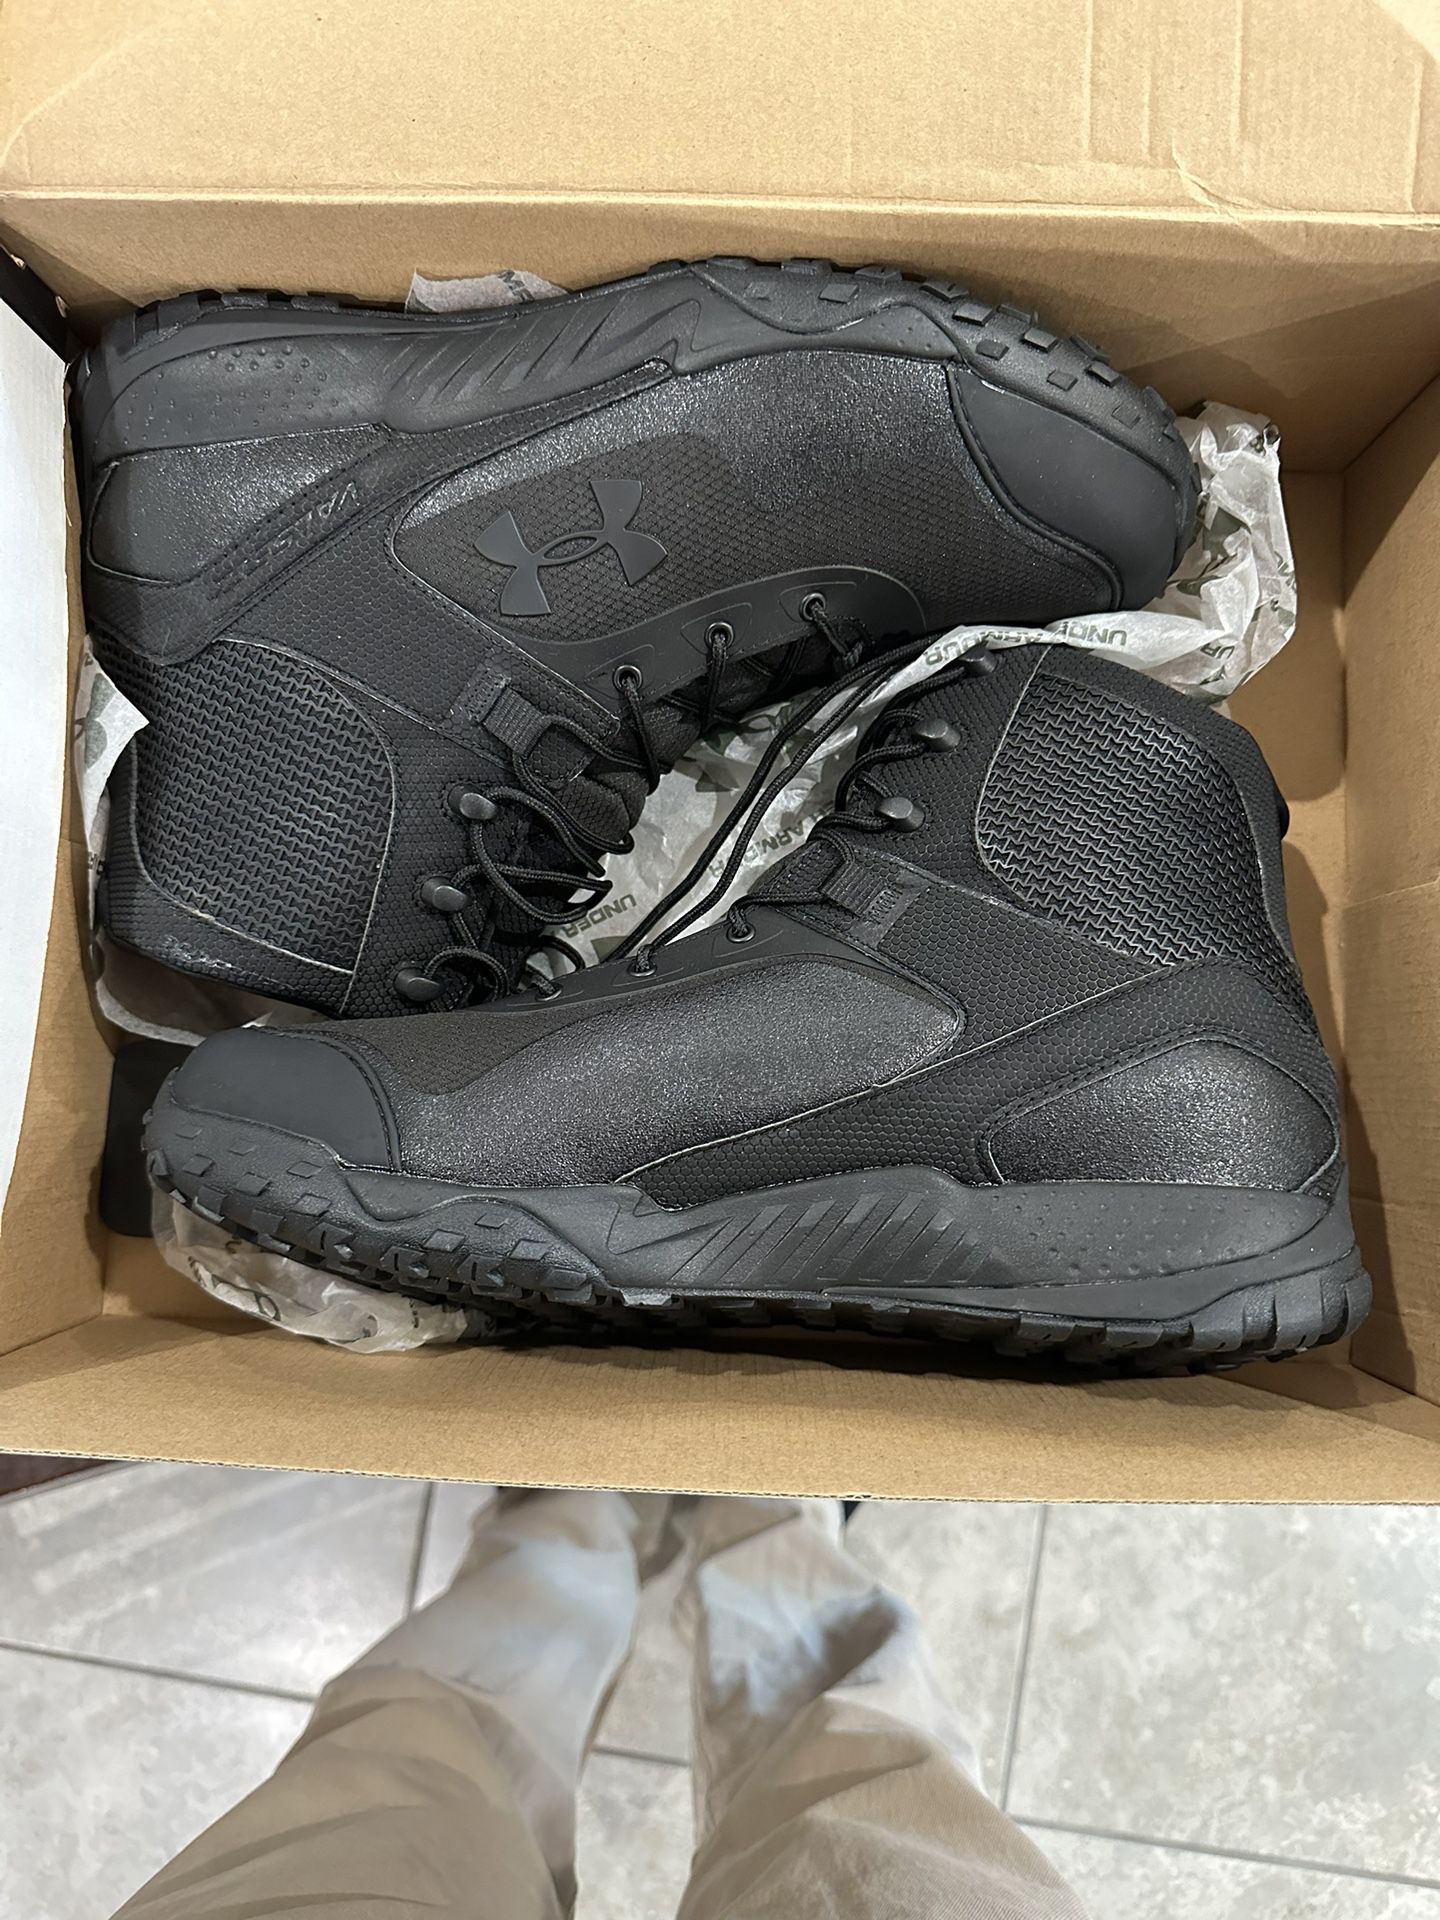 Under Armor Boots